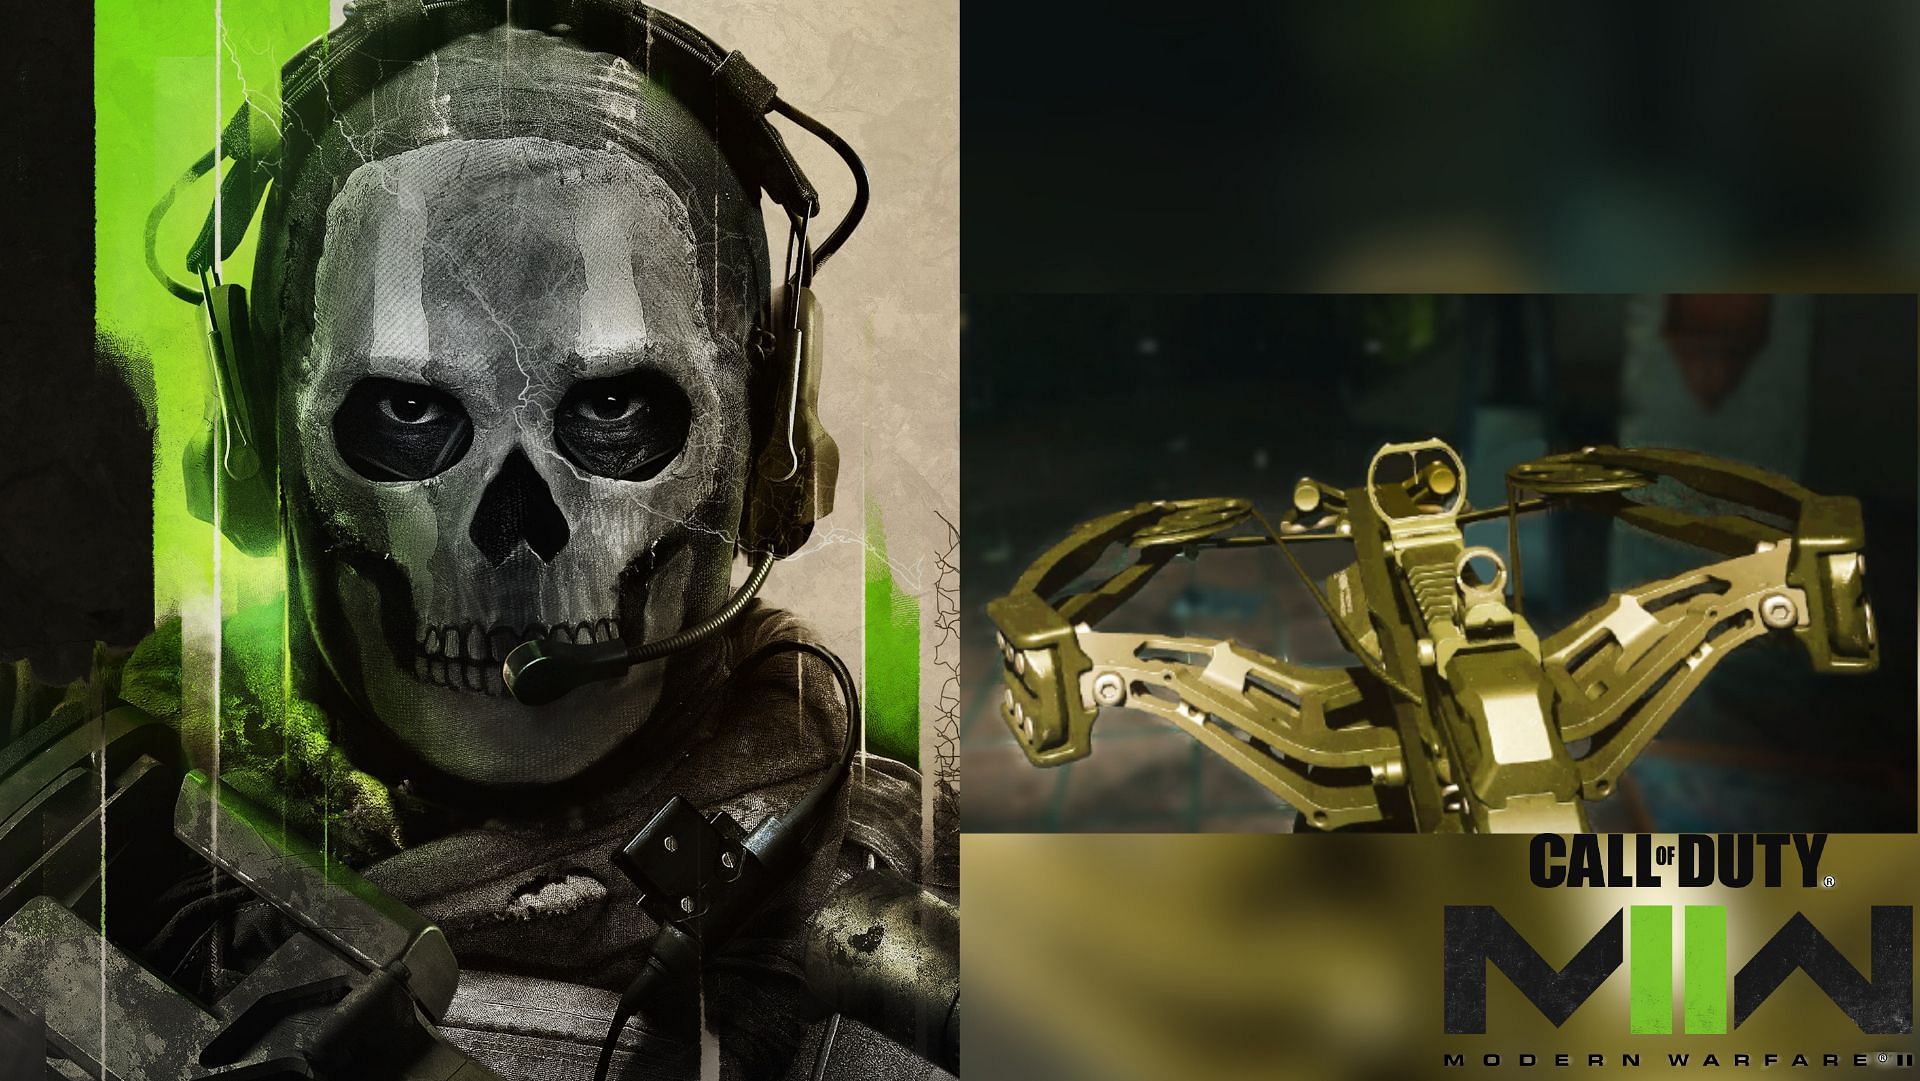 Crossbow can be exclusively found in 2 missions in Modern Warfare 2 (Images via Activision)